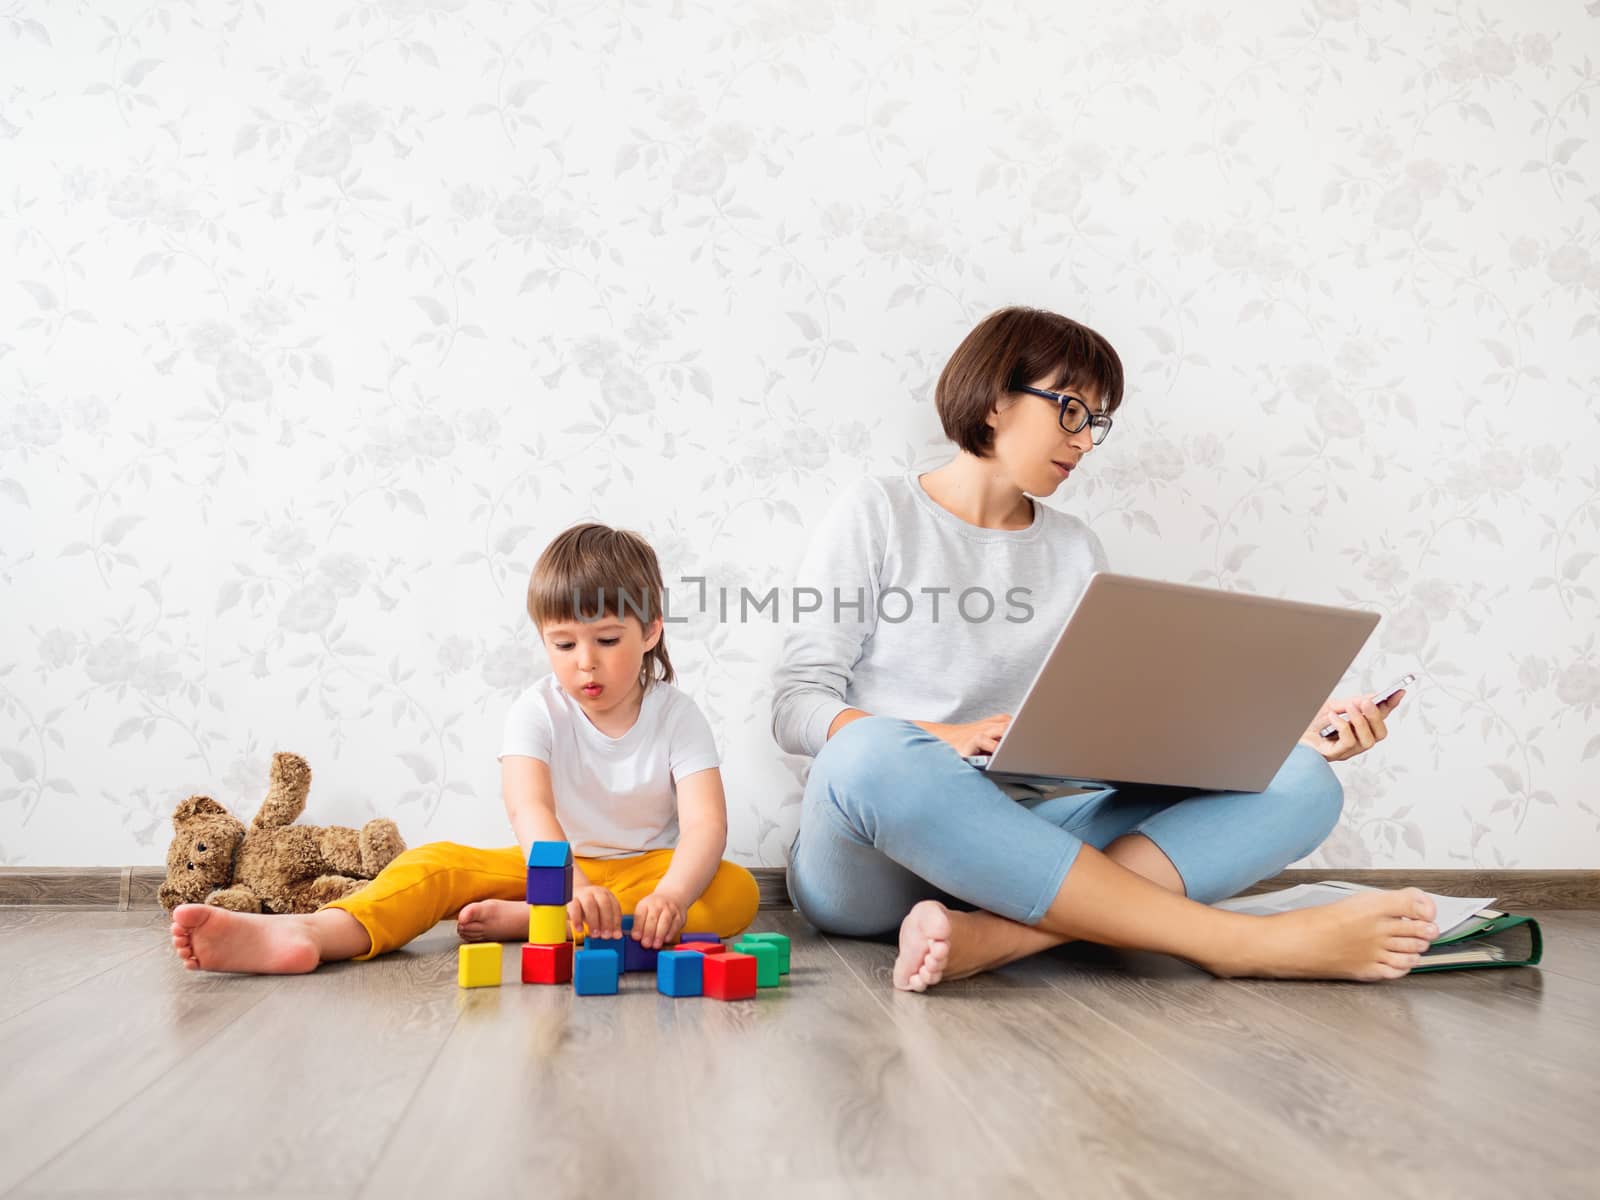 Mom and son at home quarantine because of coronavirus COVID19. Mother works remotely with laptop and smartphone, son plays with toy blocks. Self isolation at home.